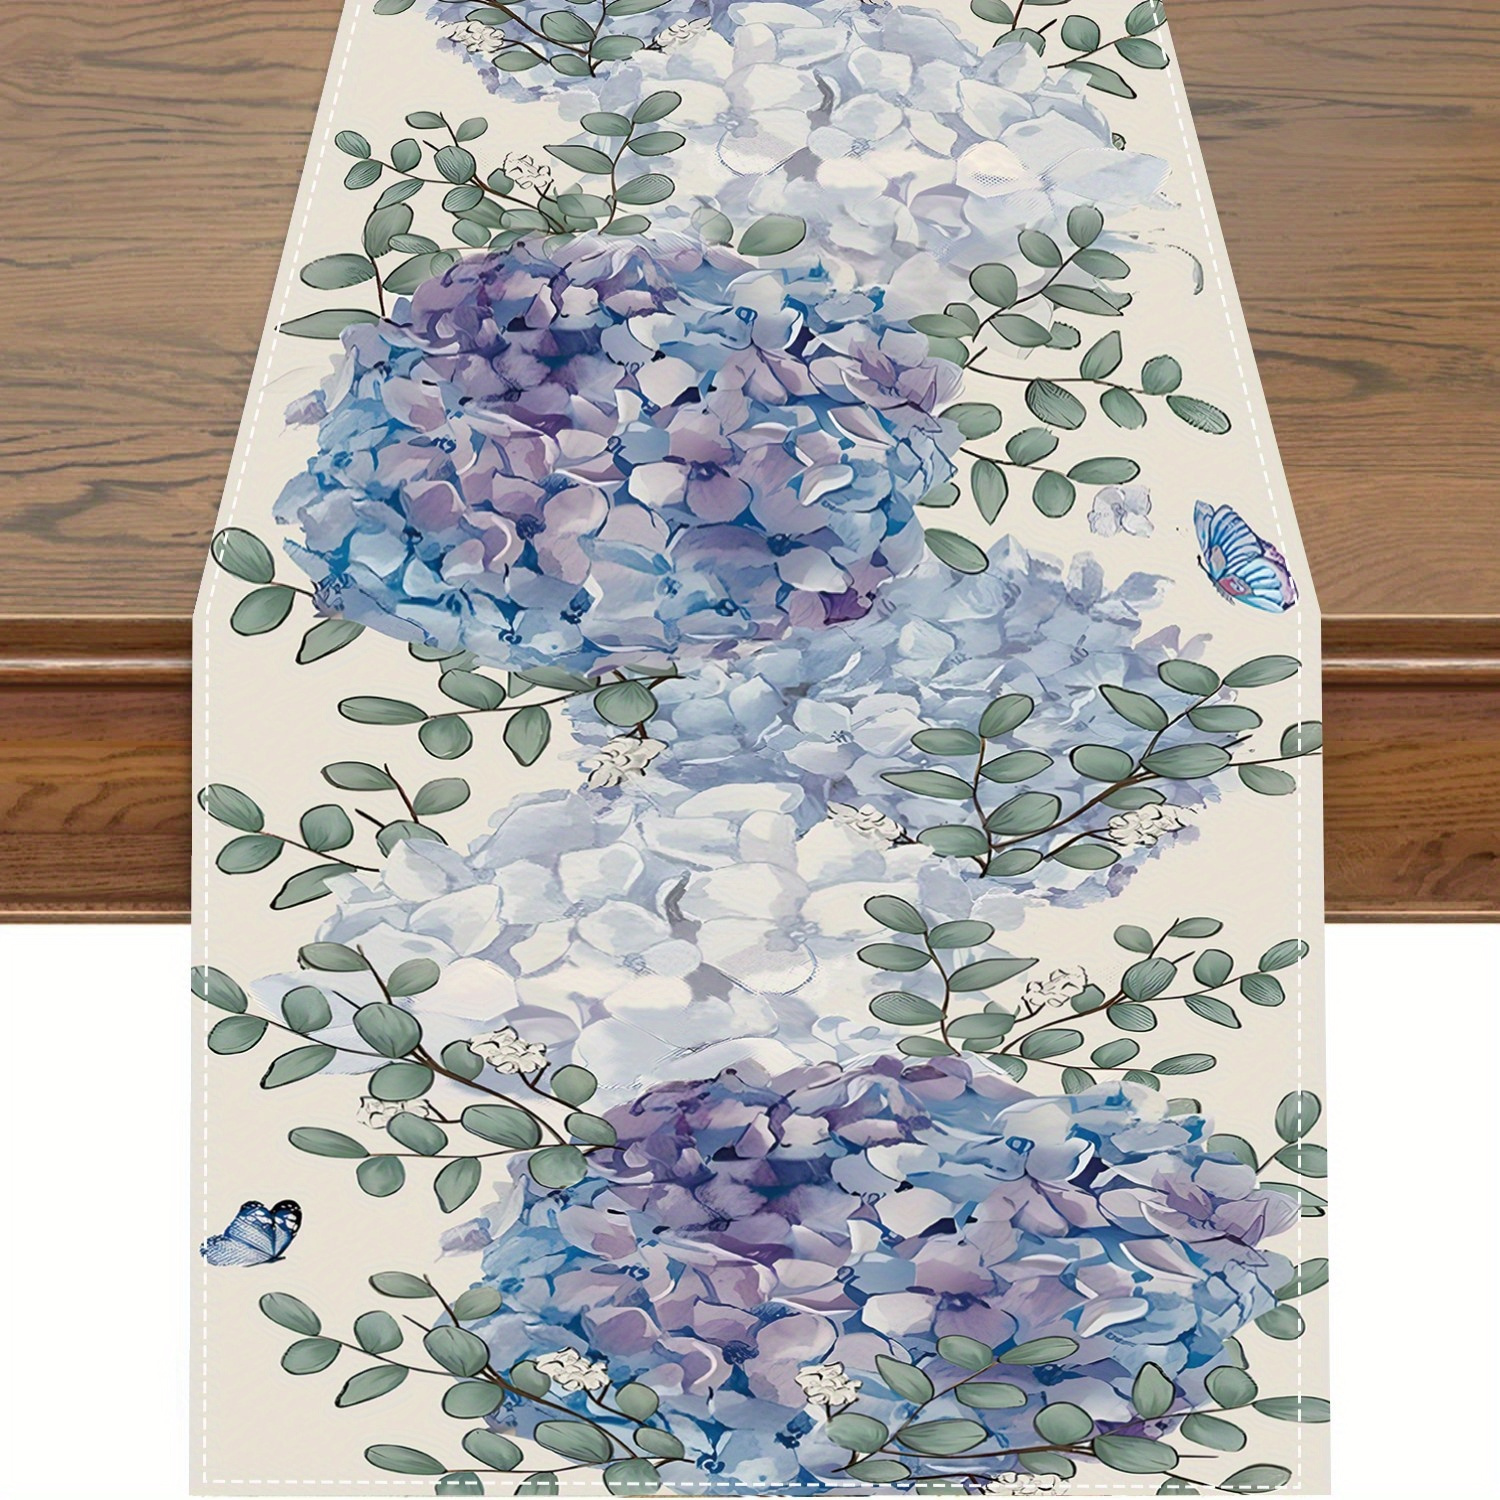 

Summer Table Runner With Flowers And Leaves: 13'' X 72'' Rectangular Table Decorations For Indoor And Outdoor Dining - Perfect For Spring And Summer Holidays